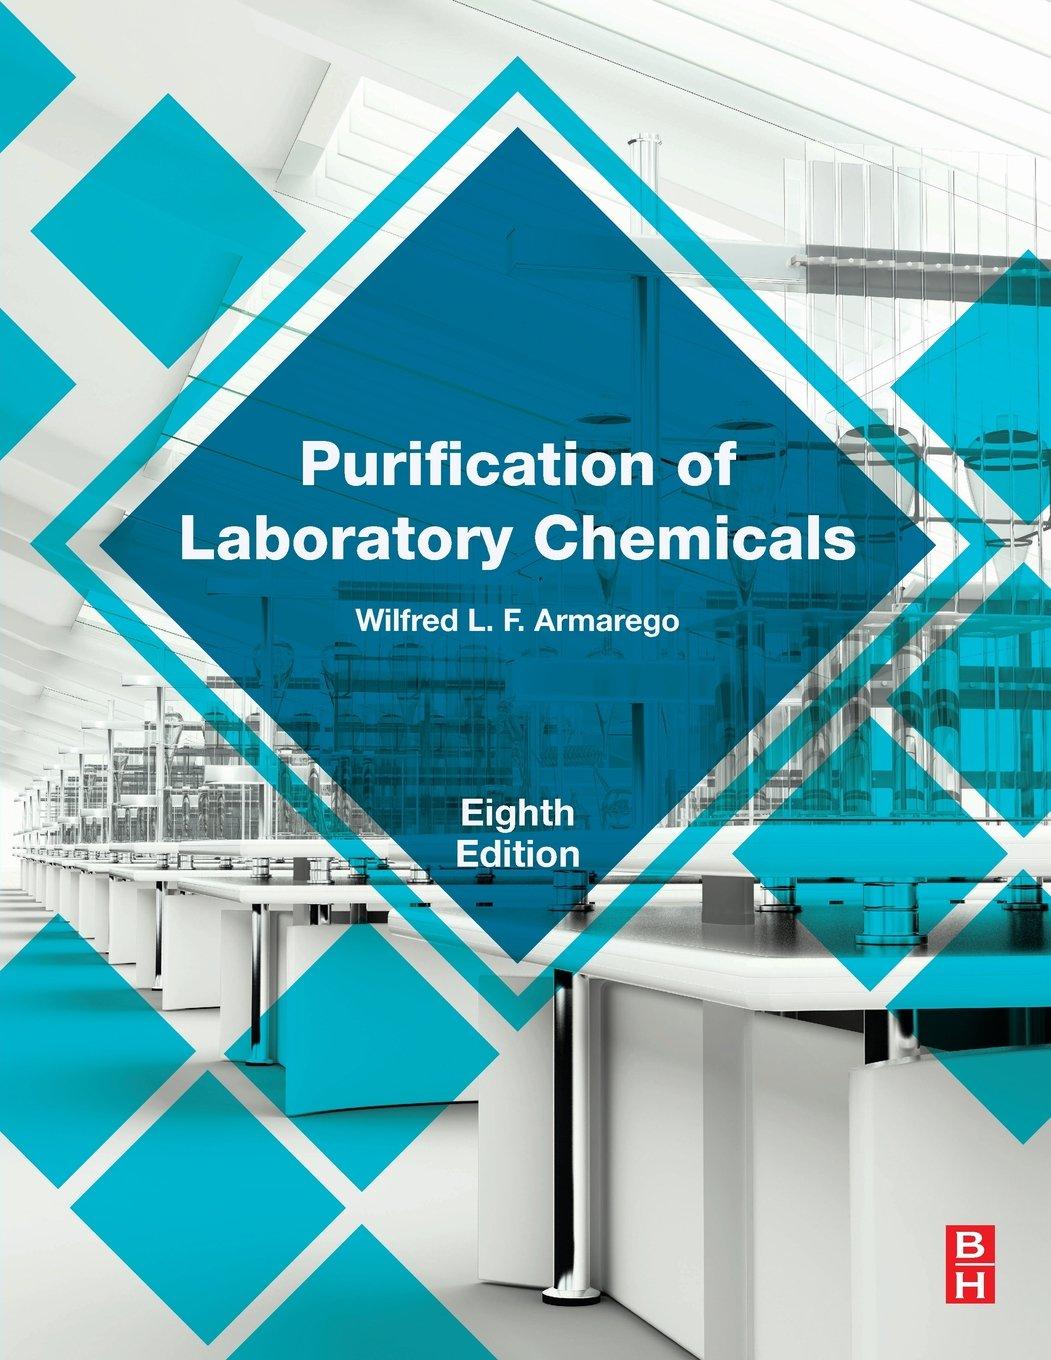 purification of laboratory chemicals 8th edition w.l.f. armarego 0128054573, 9780128054574